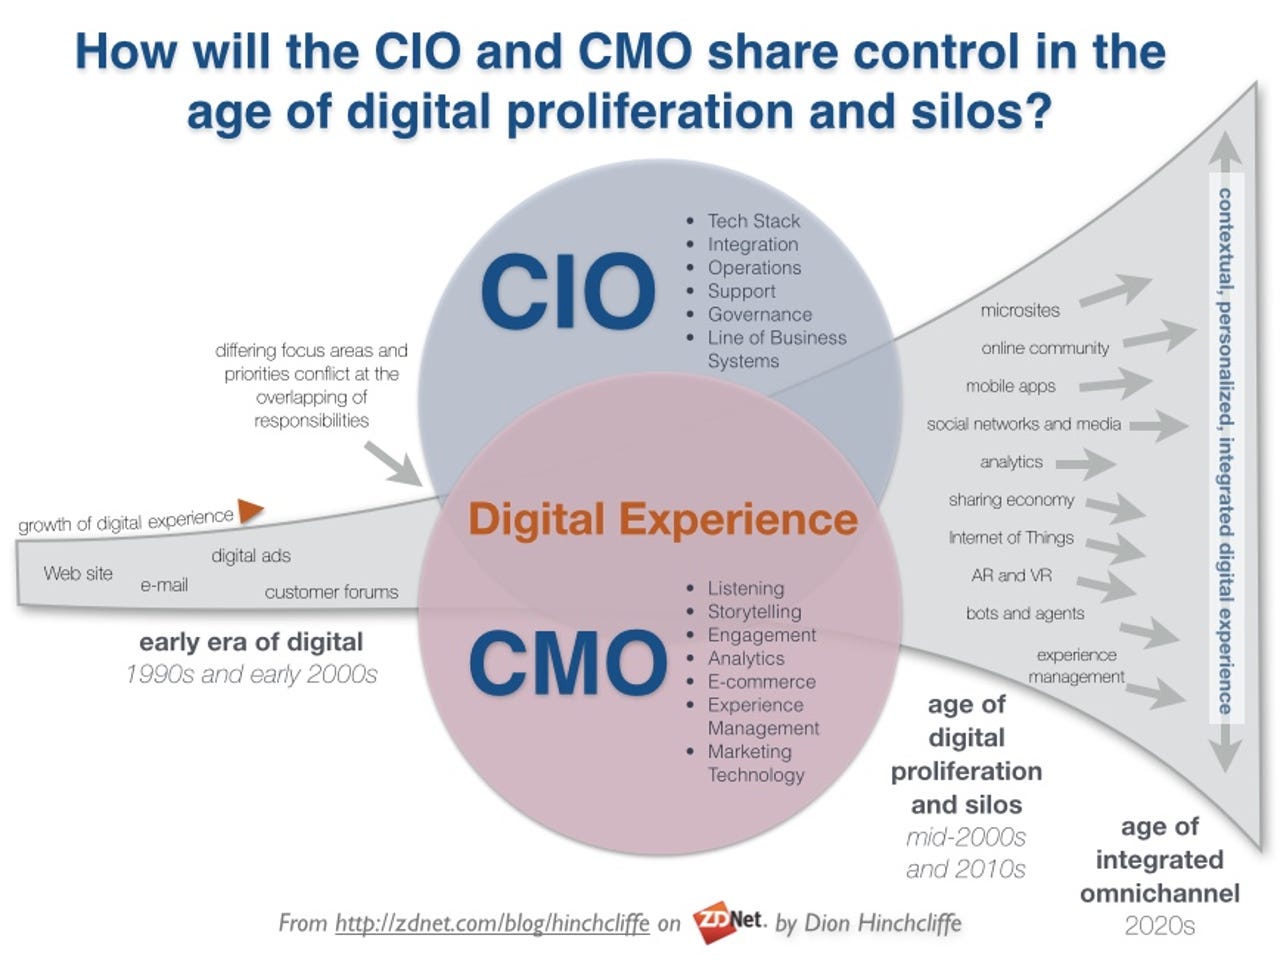 CIO and CMO Technology Alignment and Collaboration for the Digital Marketing Experience and Customer Journey